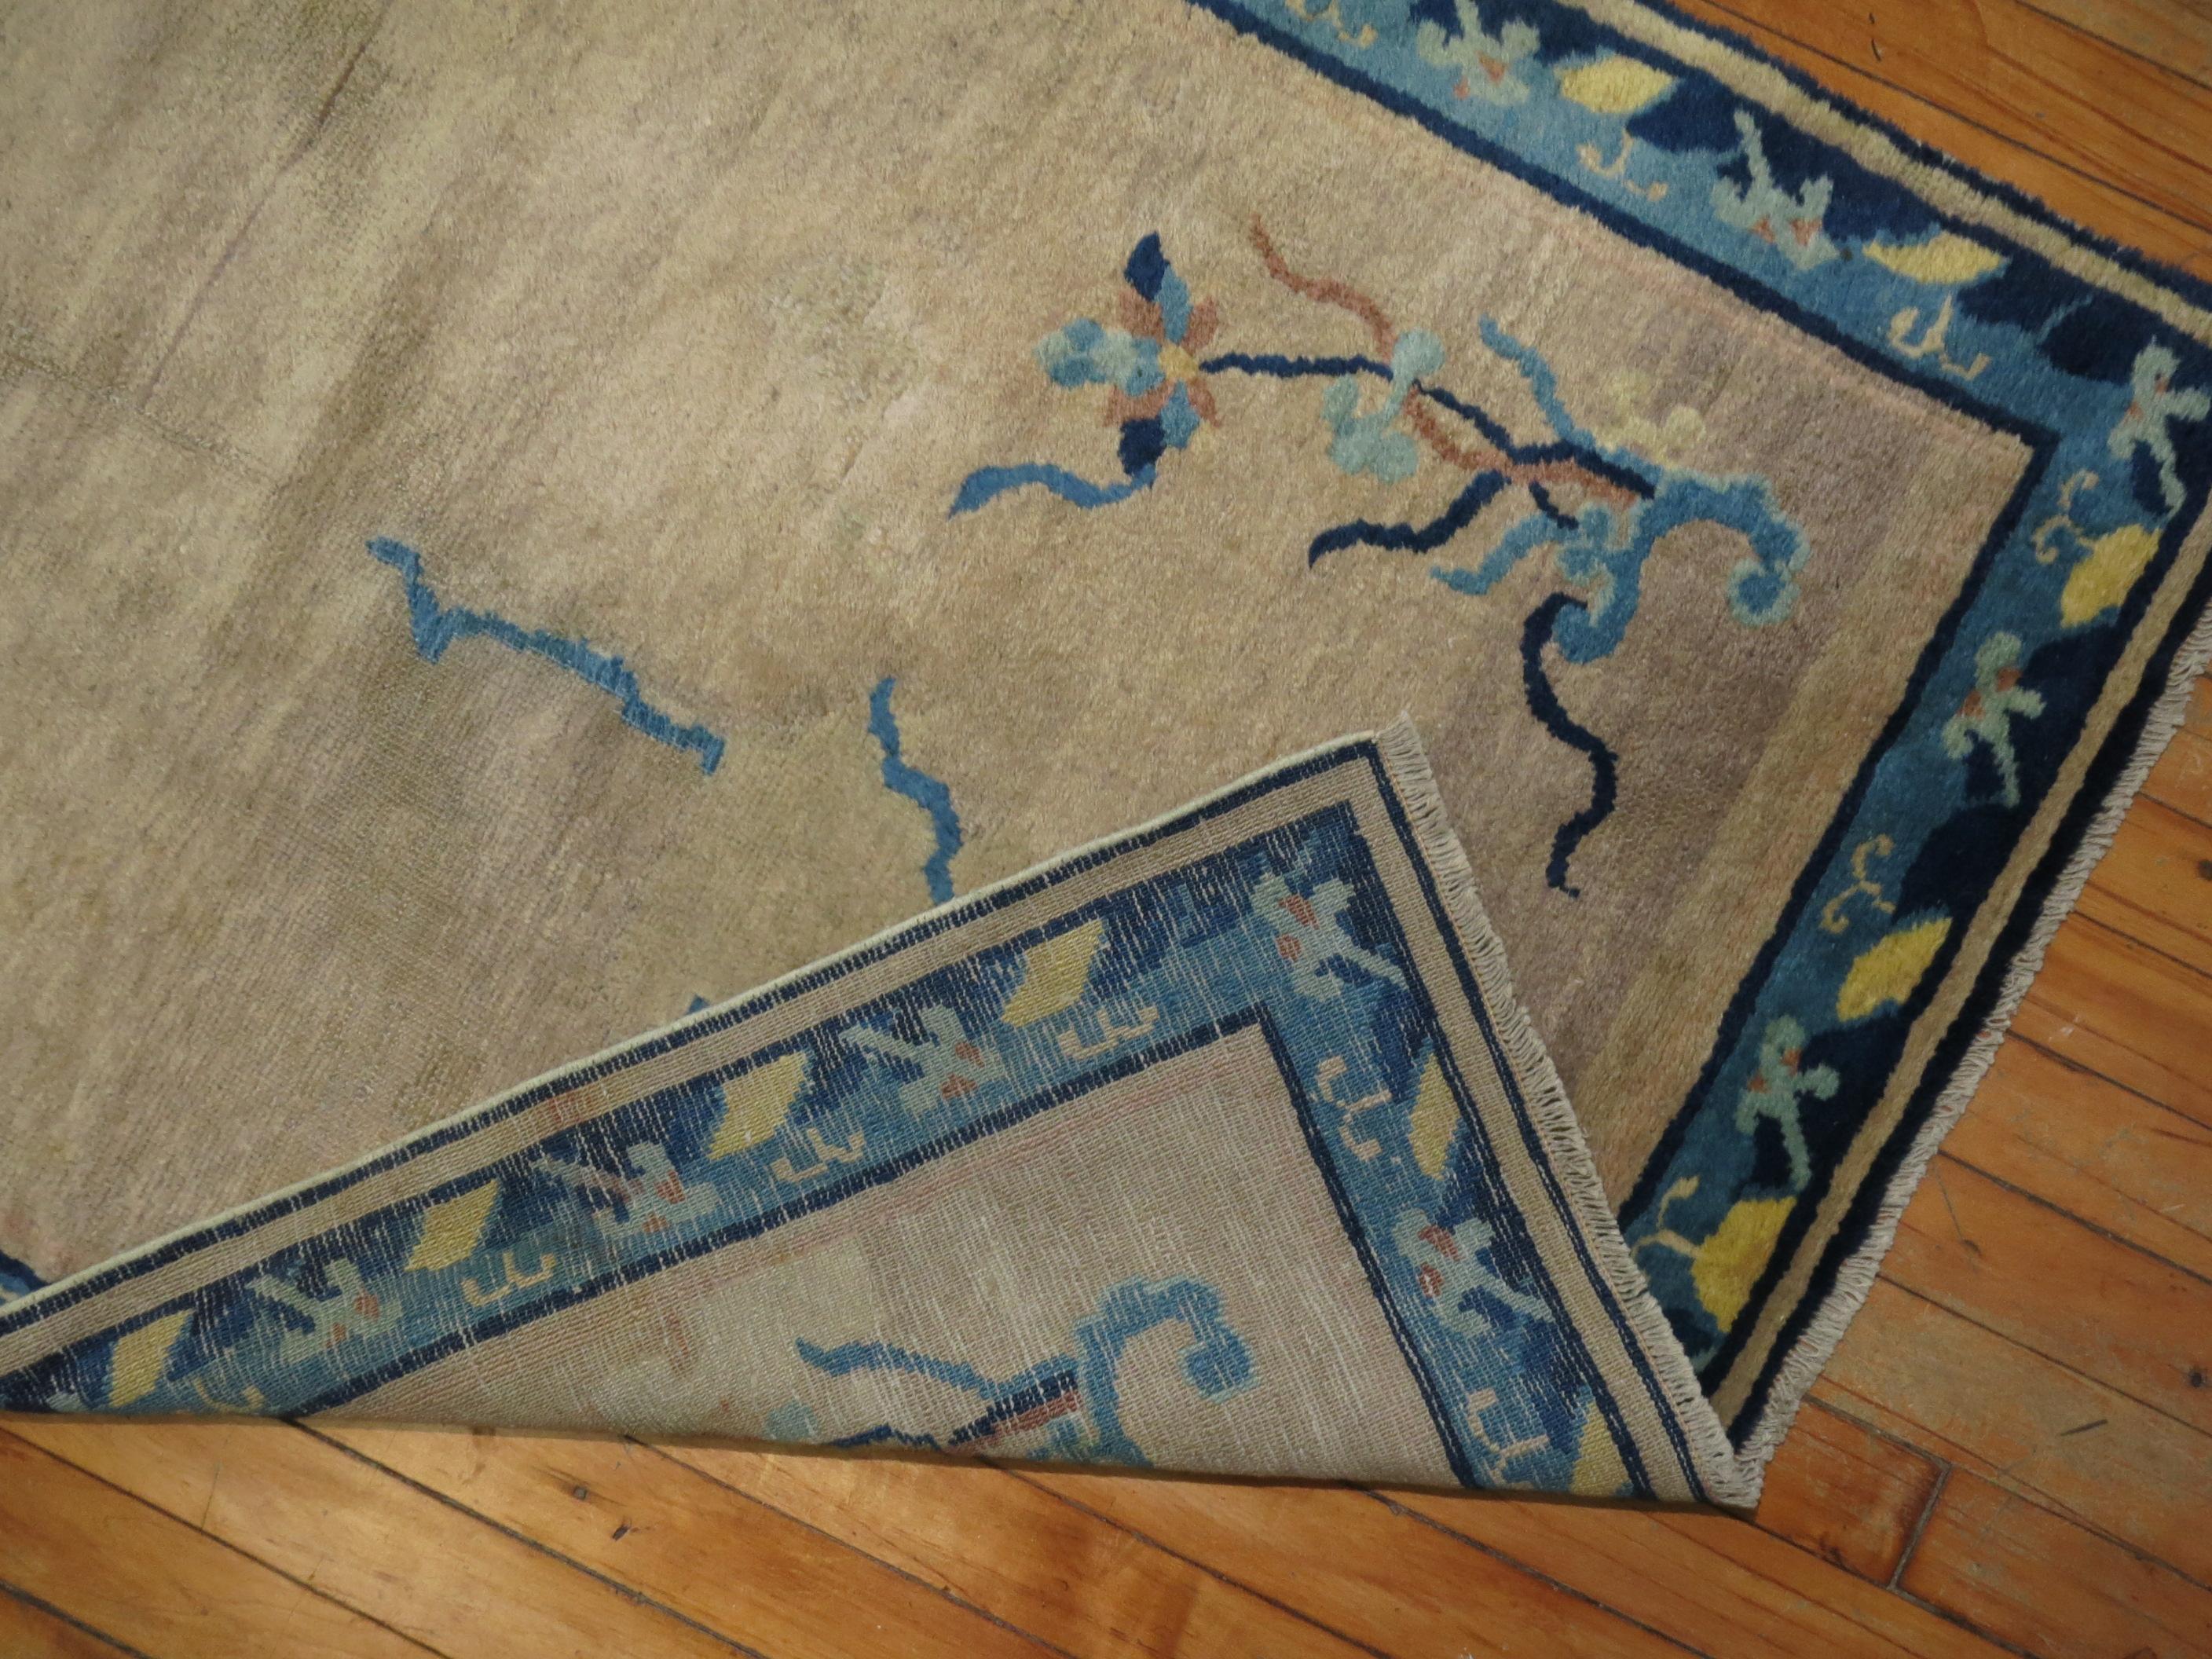 Long 1920s Chinese runner with a solid open field design with floral motifs in beige with a lovely floral border in navy and light blue. Excellent condition.

Measures: 3' x 19'3